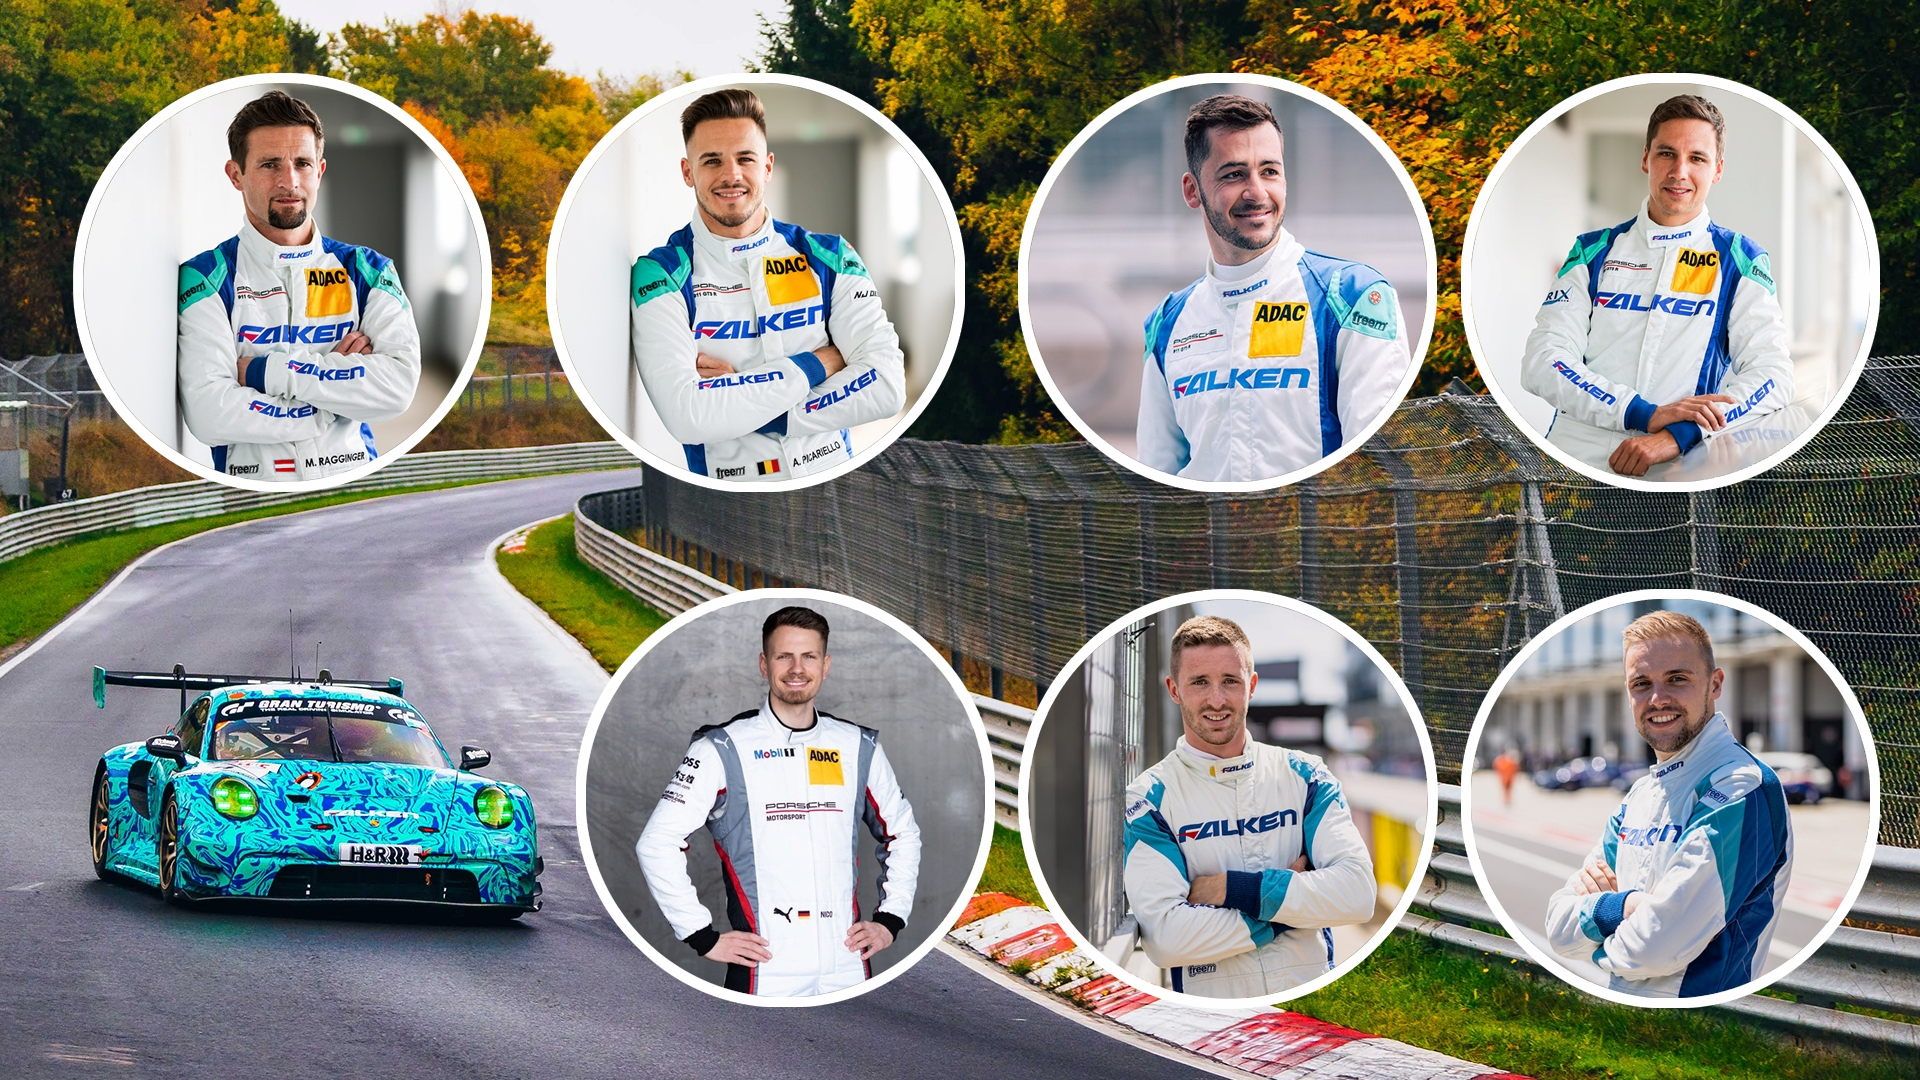 Falken Motorsports confirms 2023 Nürburgring Endurance Series (NLS) entry with the new Porsche 911 GT3 R and a talented driver line-up